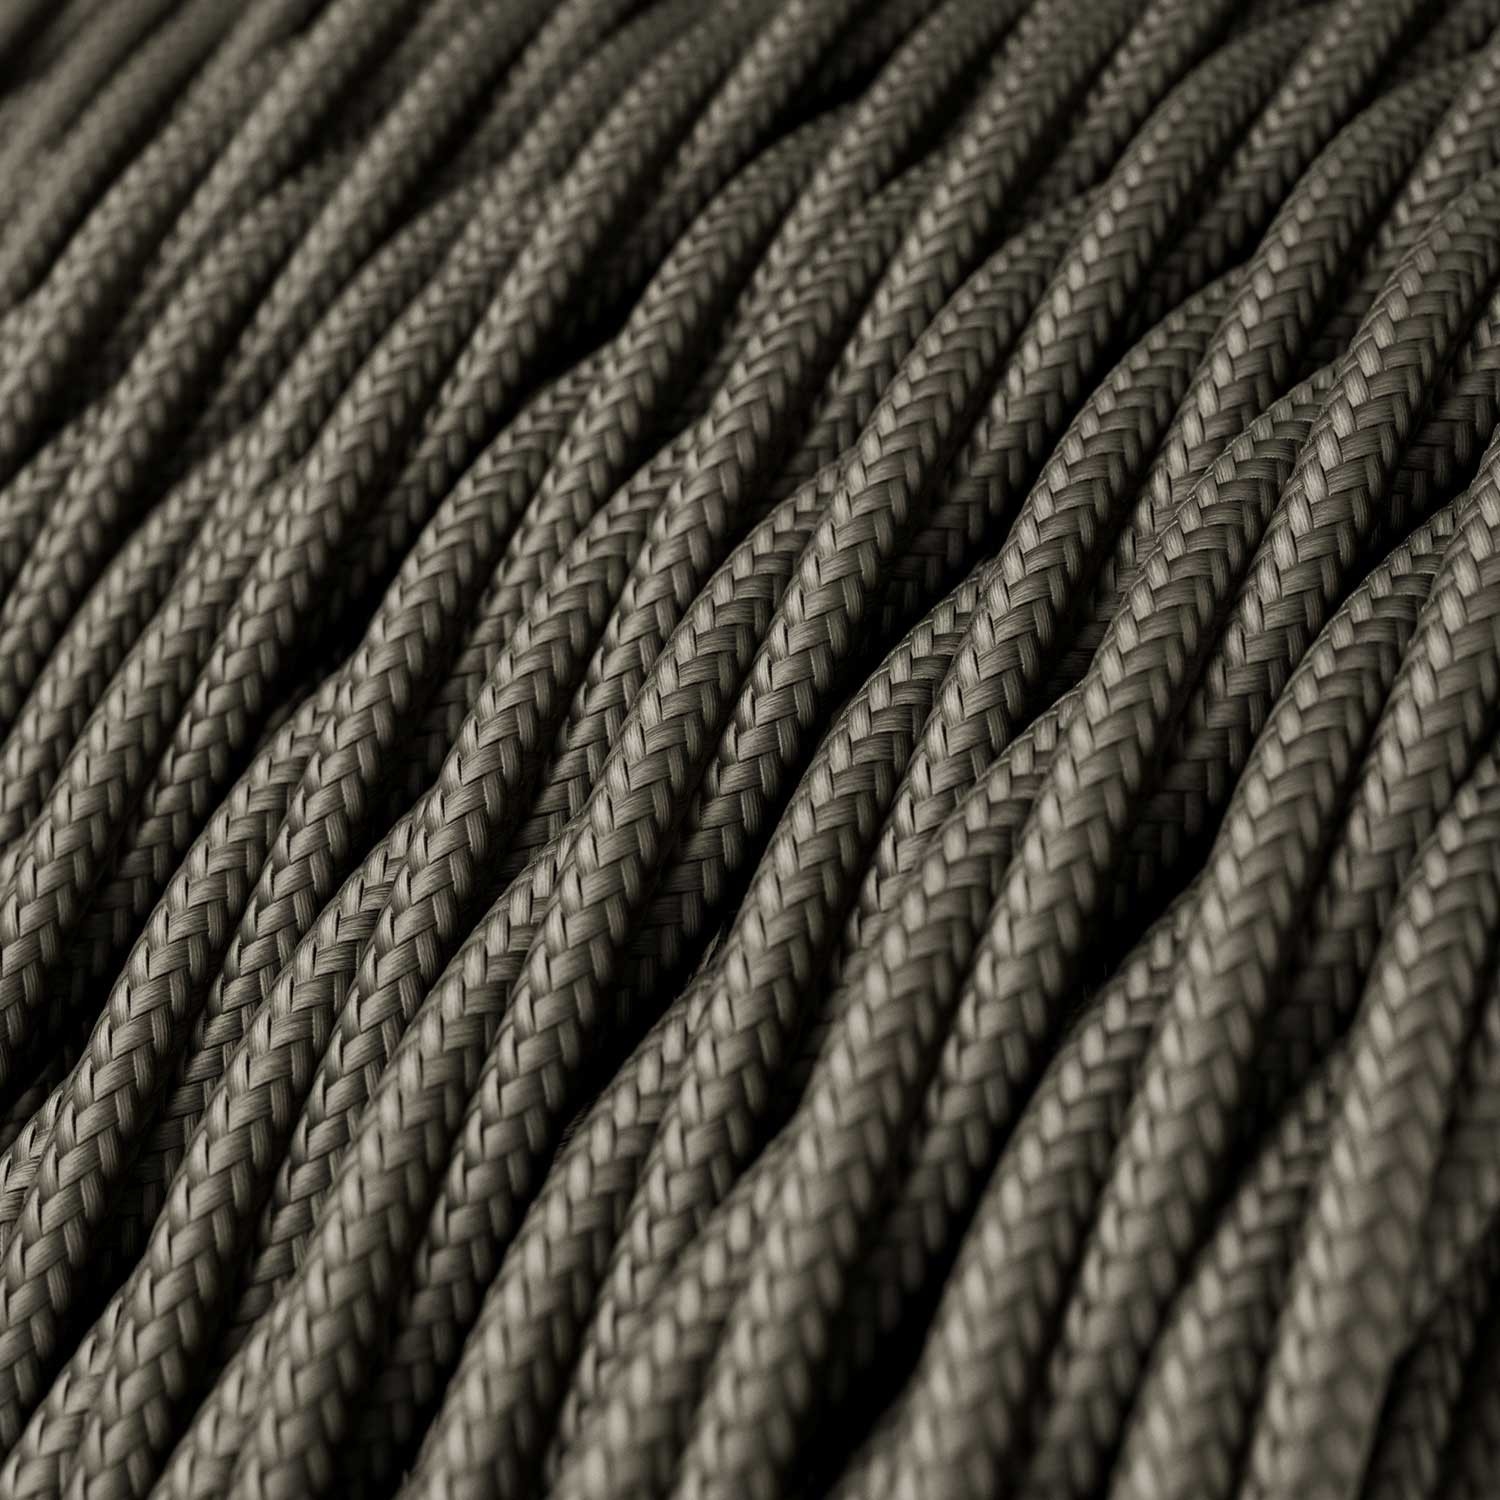 TM26 Dark Grey Twisted Rayon Electrical Fabric Cloth Cord Cable